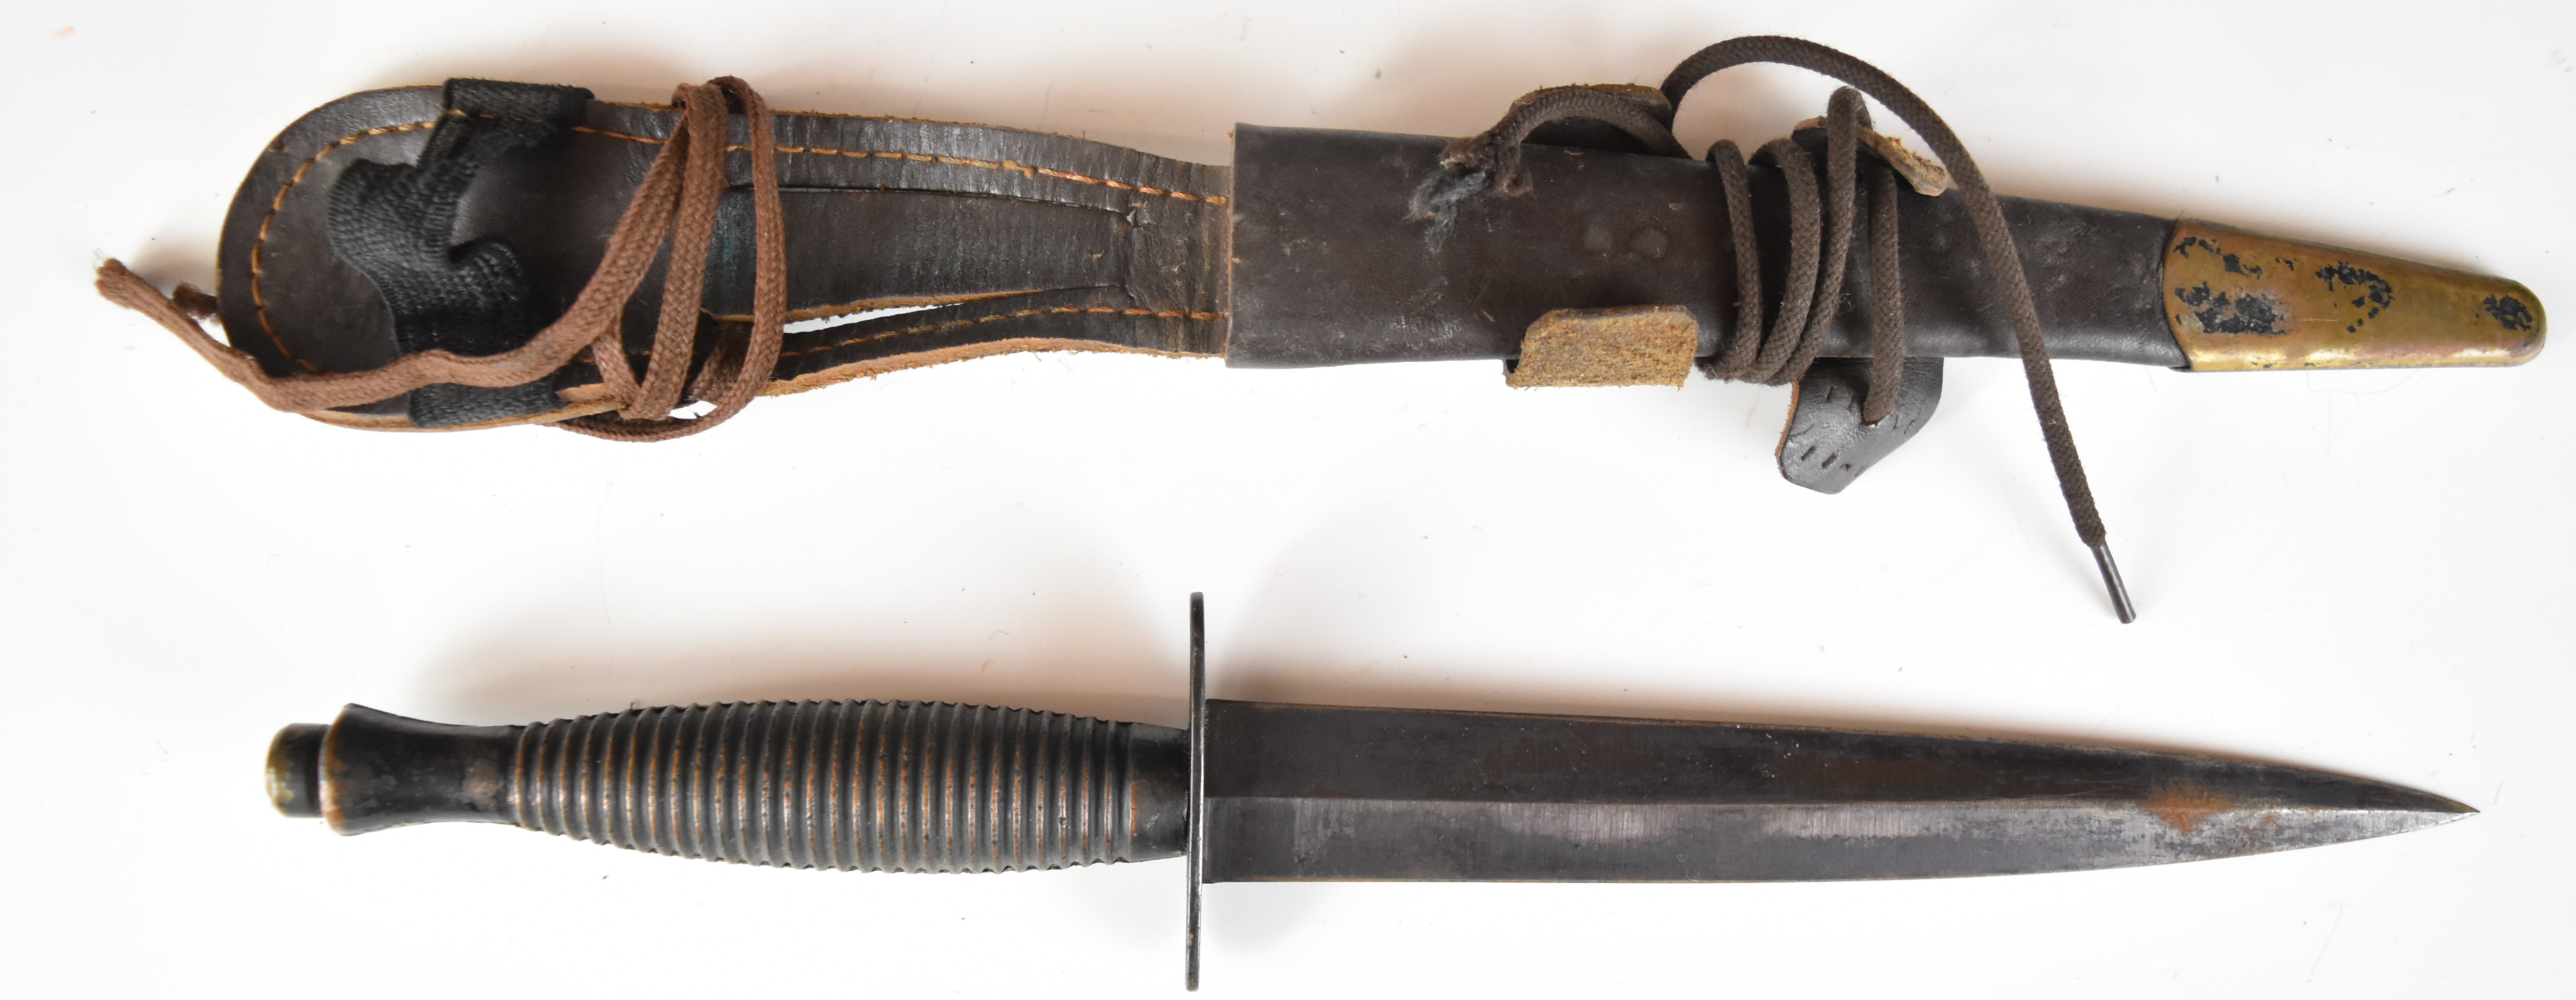 Fairbairn Sykes pattern fighting knife stamped William Rogers to crosspiece, with 17.5cm double